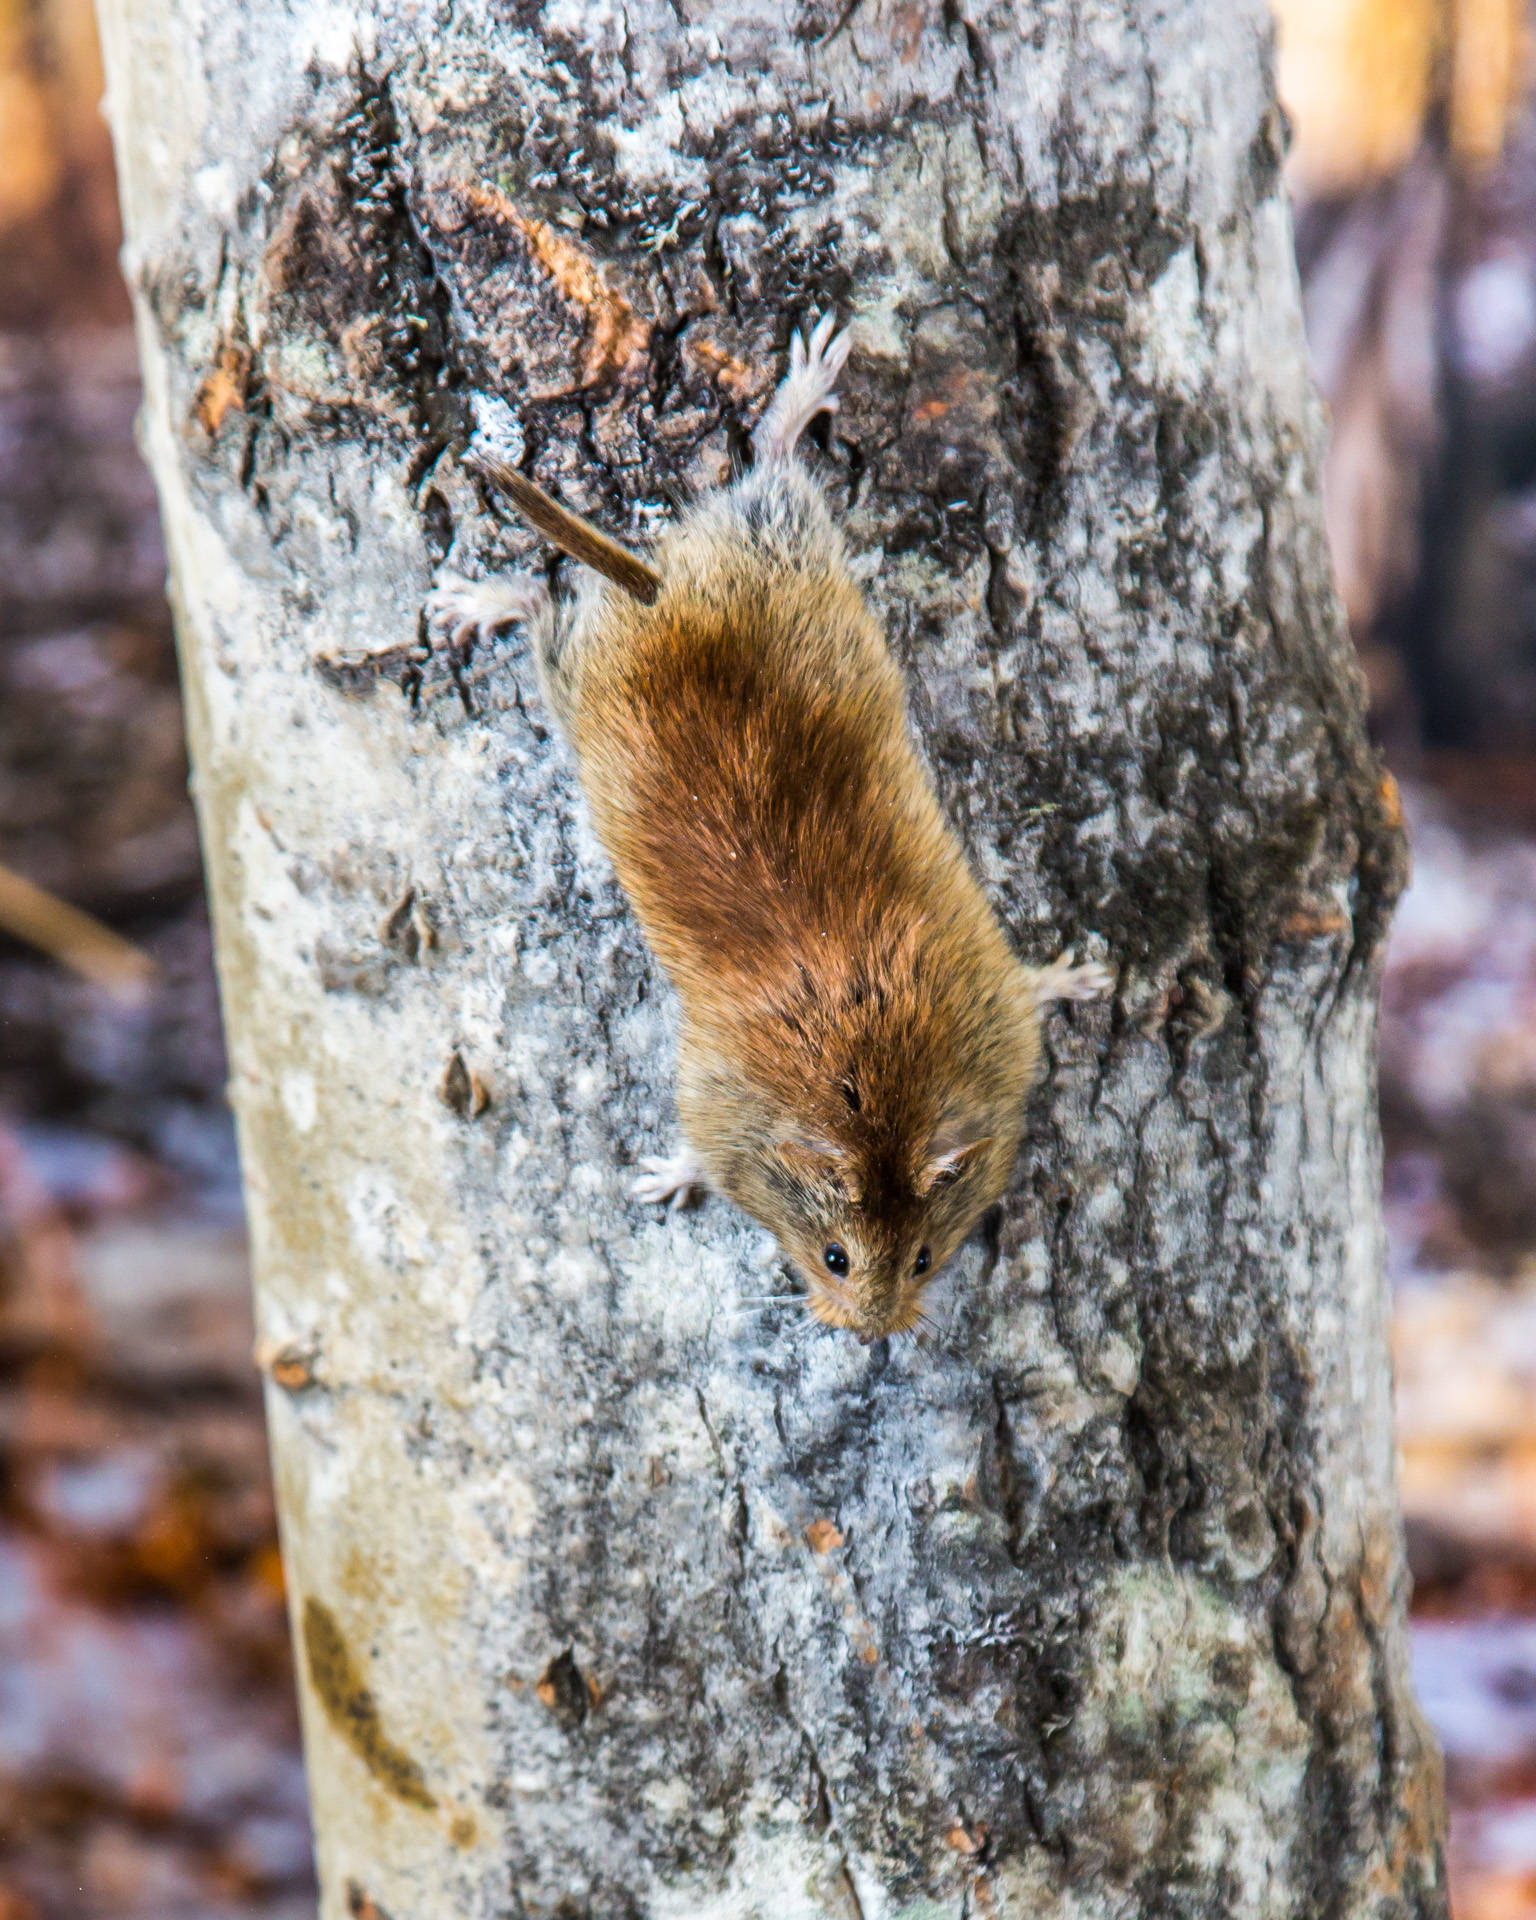 A northern red-backed vole climbing down a tree. (Courtesy Photo / Todd Paris, UAF)